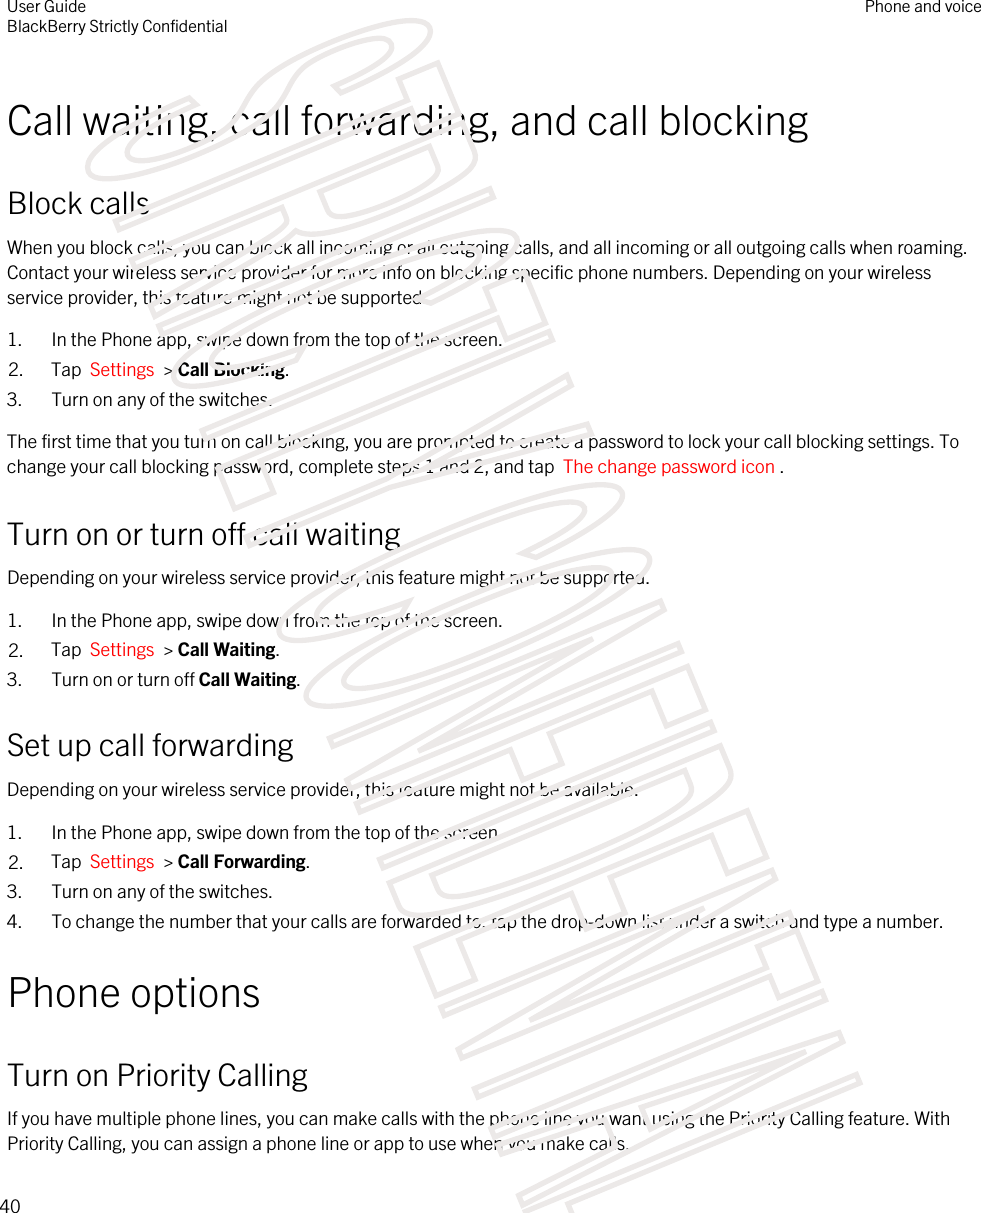 Call waiting, call forwarding, and call blockingBlock callsWhen you block calls, you can block all incoming or all outgoing calls, and all incoming or all outgoing calls when roaming. Contact your wireless service provider for more info on blocking specific phone numbers. Depending on your wireless service provider, this feature might not be supported. 1. In the Phone app, swipe down from the top of the screen.2. Tap  Settings  &gt; Call Blocking.3. Turn on any of the switches.The first time that you turn on call blocking, you are prompted to create a password to lock your call blocking settings. To change your call blocking password, complete steps 1 and 2, and tap  The change password icon .Turn on or turn off call waitingDepending on your wireless service provider, this feature might not be supported. 1. In the Phone app, swipe down from the top of the screen.2. Tap  Settings  &gt; Call Waiting.3. Turn on or turn off Call Waiting.Set up call forwardingDepending on your wireless service provider, this feature might not be available.1. In the Phone app, swipe down from the top of the screen.2. Tap  Settings  &gt; Call Forwarding.3. Turn on any of the switches.4. To change the number that your calls are forwarded to, tap the drop-down list under a switch and type a number.Phone optionsTurn on Priority CallingIf you have multiple phone lines, you can make calls with the phone line you want using the Priority Calling feature. With Priority Calling, you can assign a phone line or app to use when you make calls.User GuideBlackBerry Strictly ConfidentialPhone and voice40STRICTLY CONFIDENTIAL